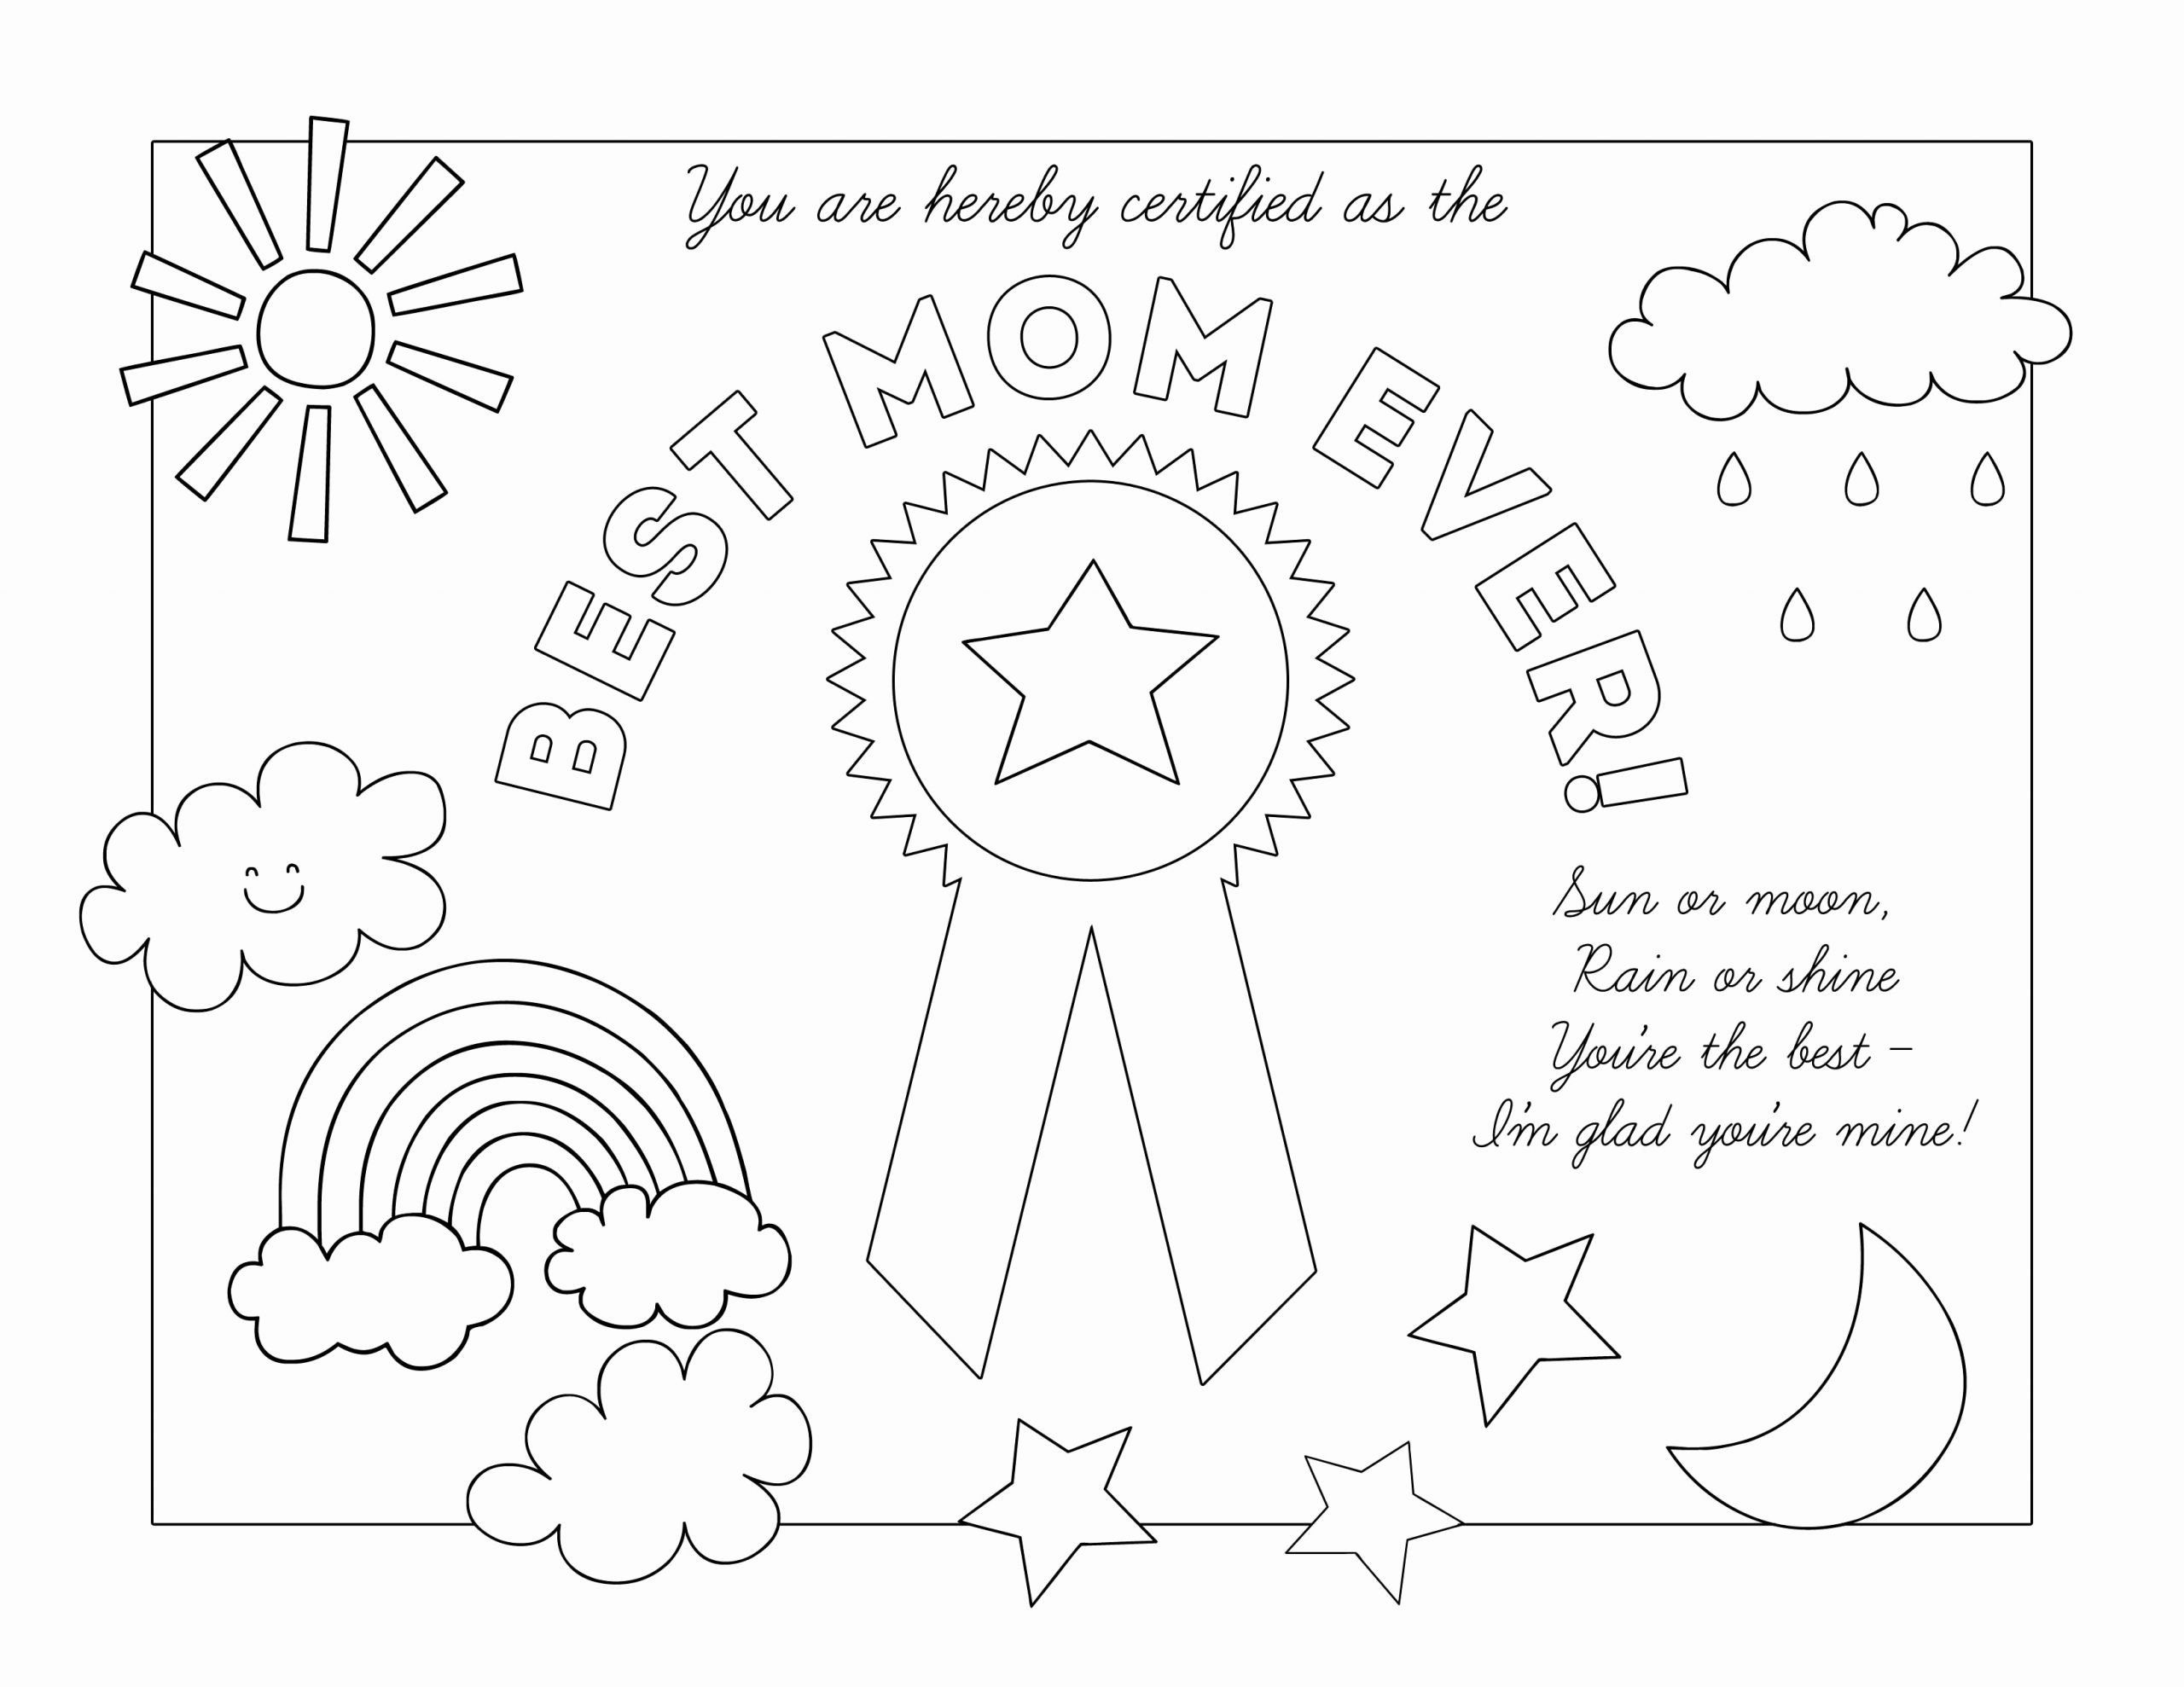 Best Mom Award Coloring Page (Page 1) - Line.17QQ.com - Coloring Library